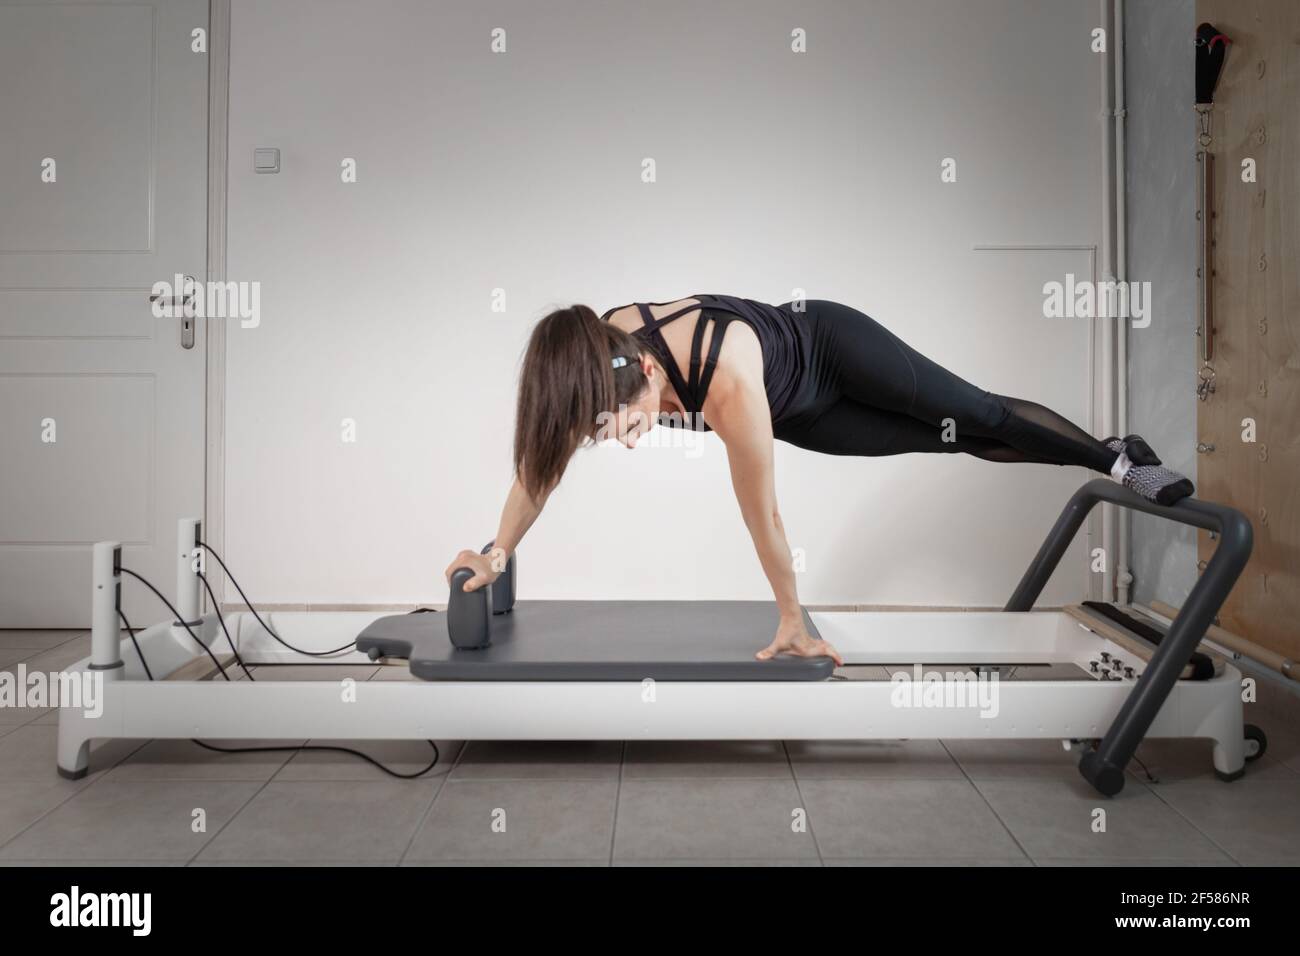 A woman doing pilates exercises on a reformed bed. Stock Photo